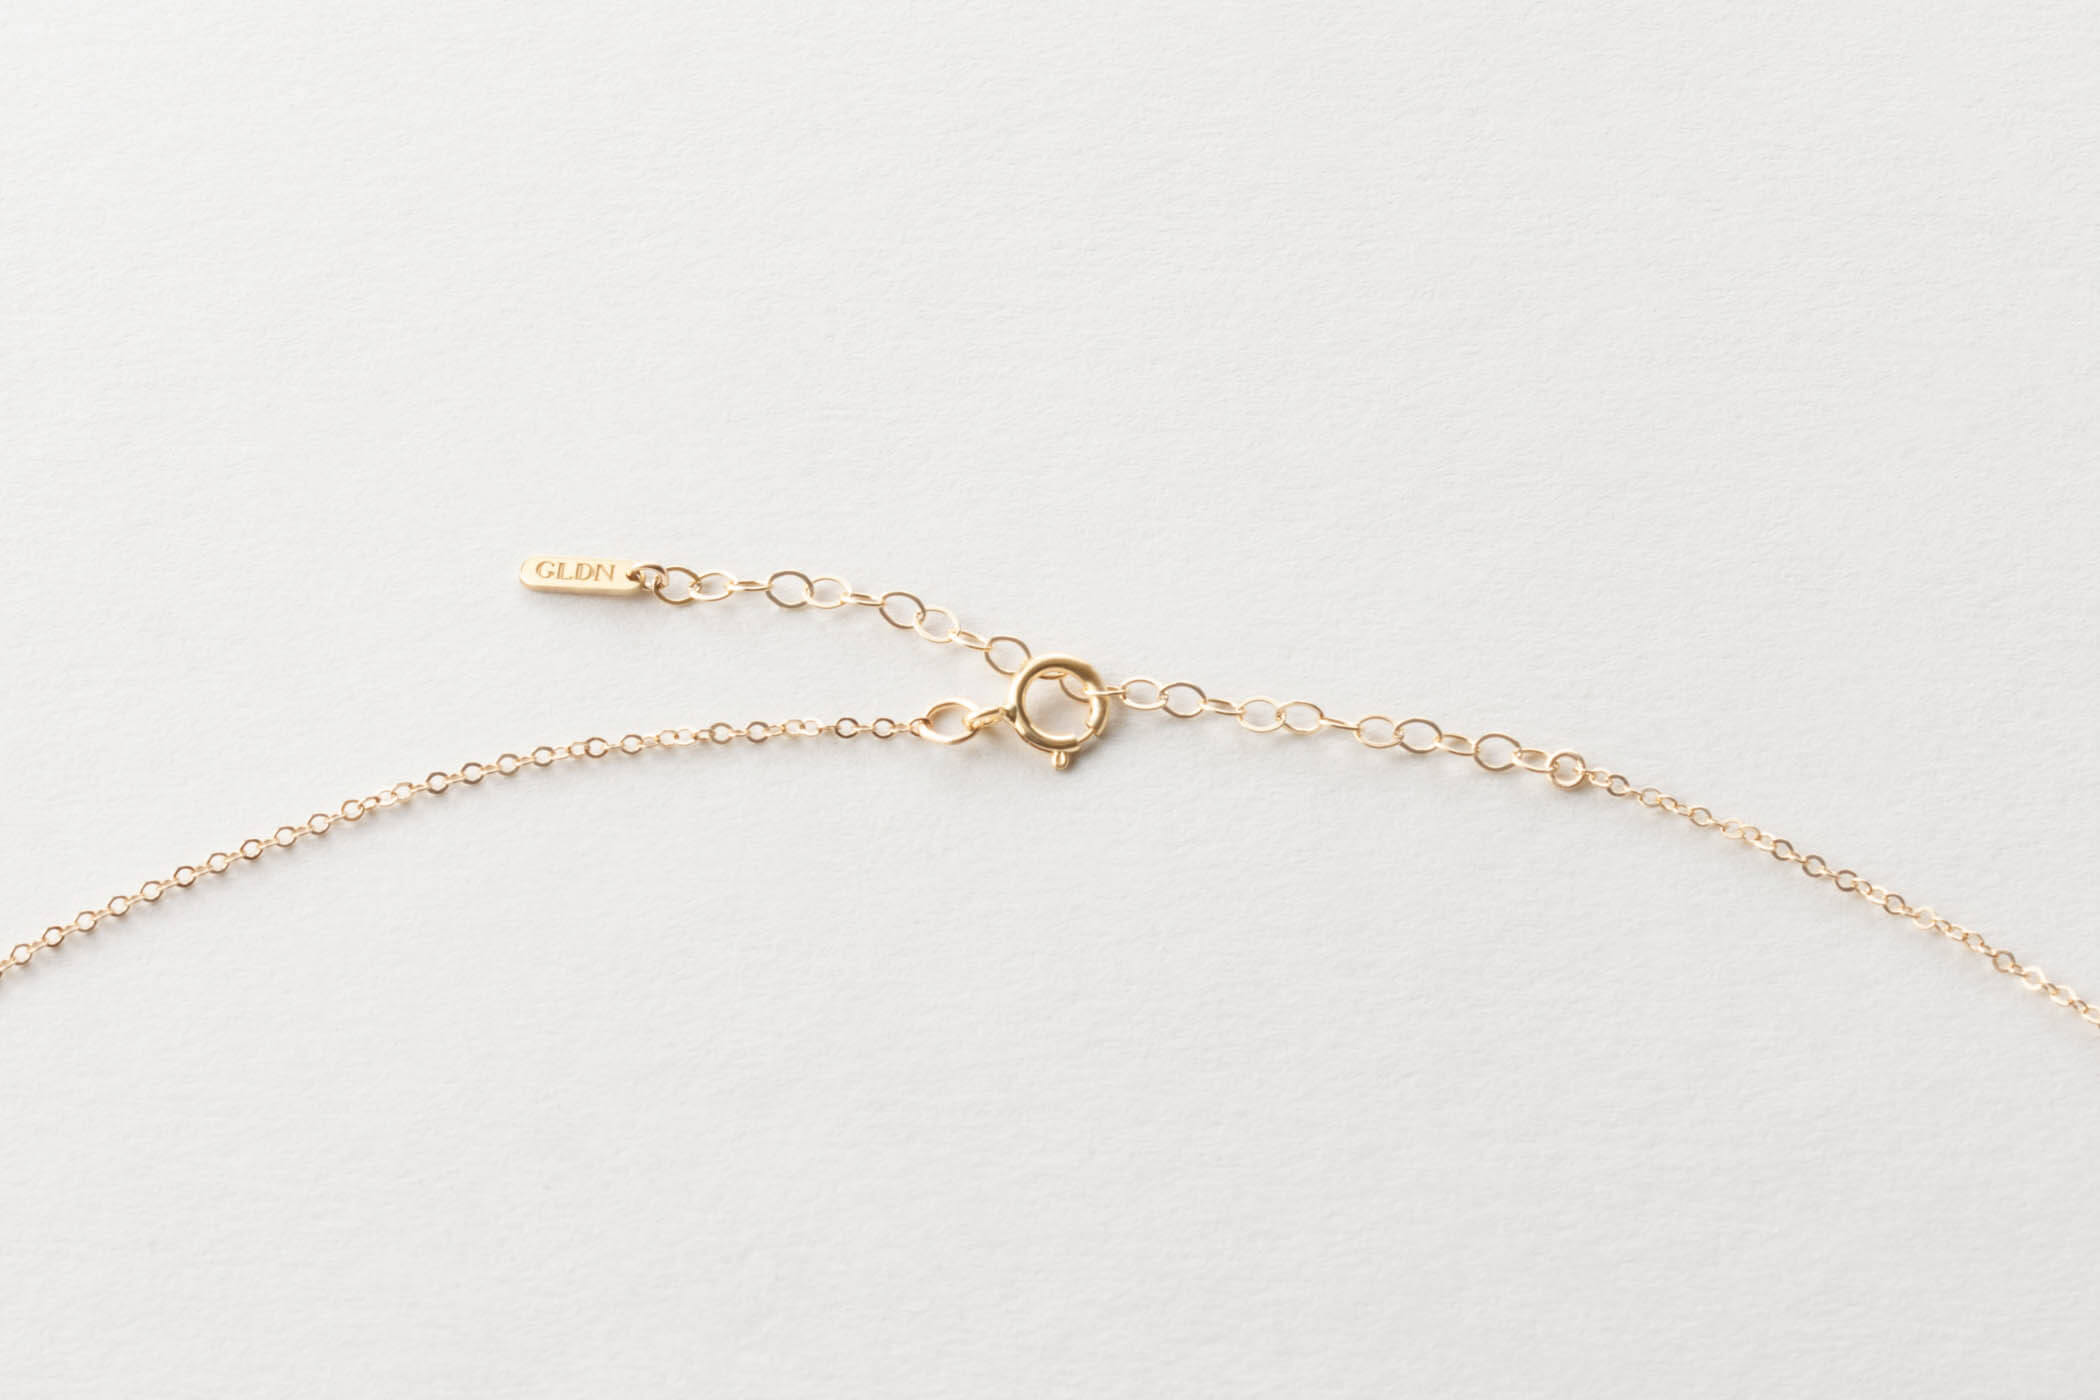 Fine Chain Necklace Extender, Rose Gold or Gold Extender 2 3 4 or 5 With  Spring Clasp, Fine 14K Rose Gold Fill Chain Extender 